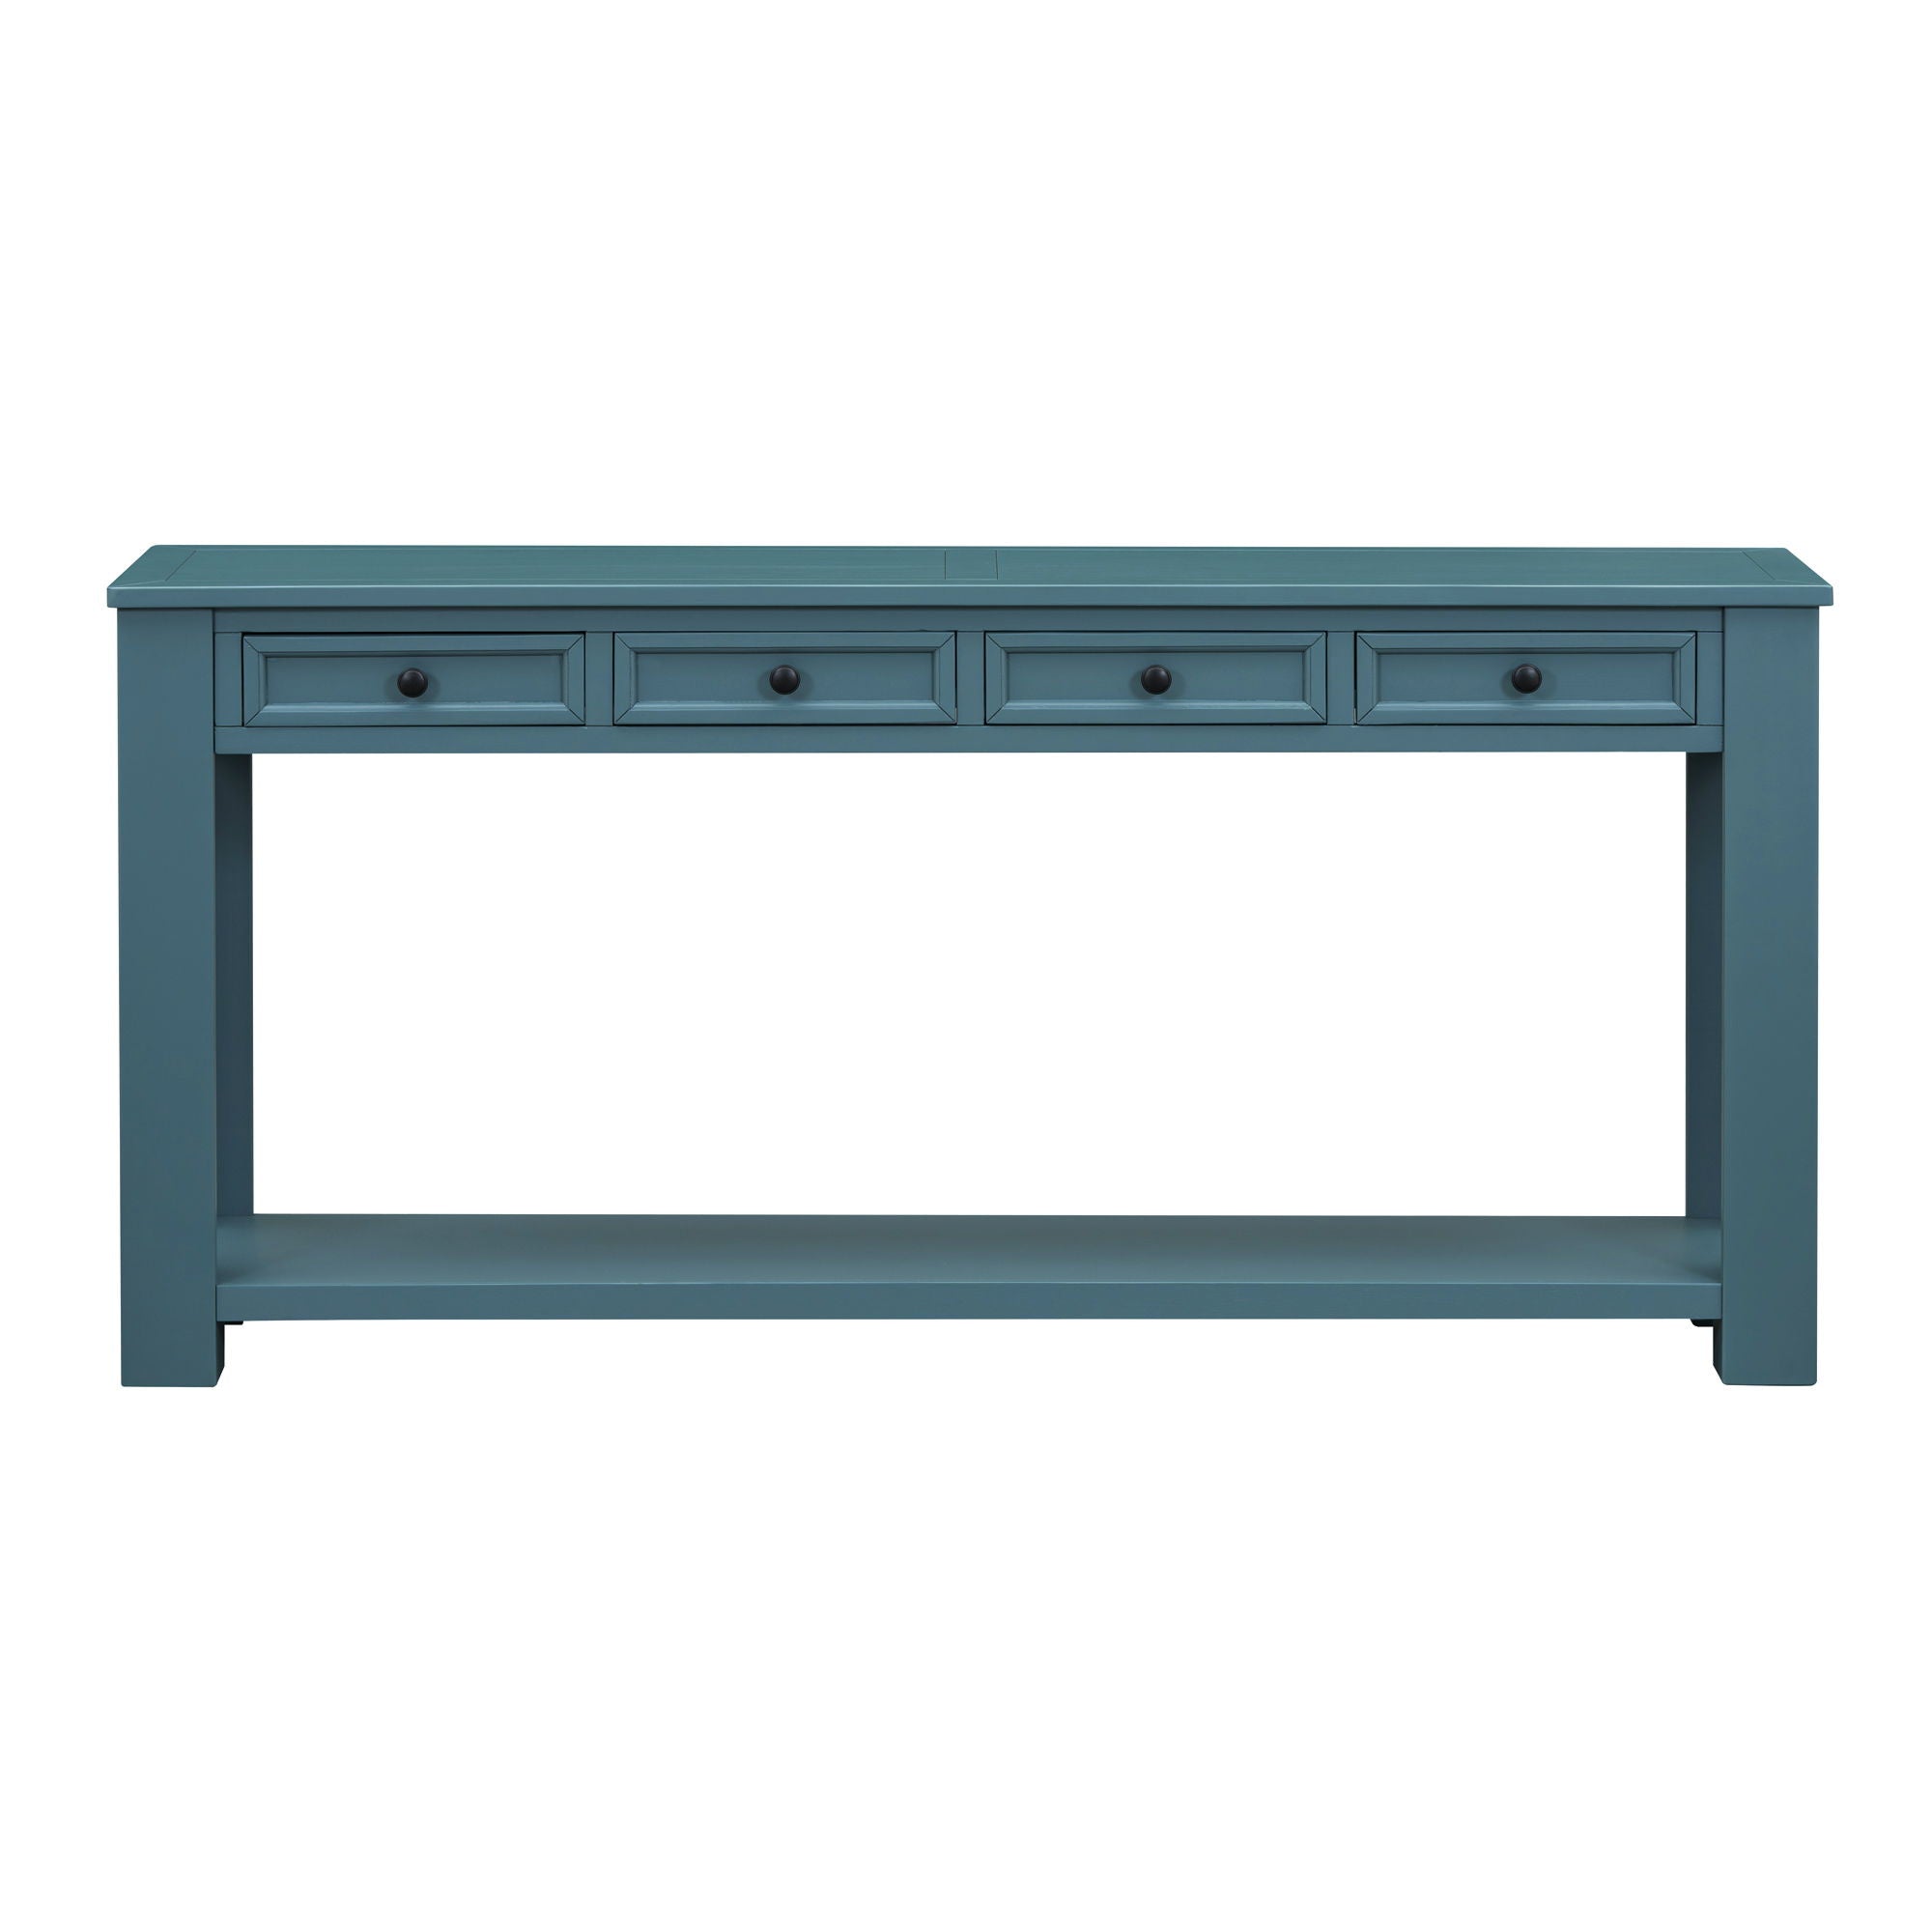 Trexm Console Table / Sofa Table With Storage Drawers And Bottom Shelf For Entryway Hallway (Dark Blue)